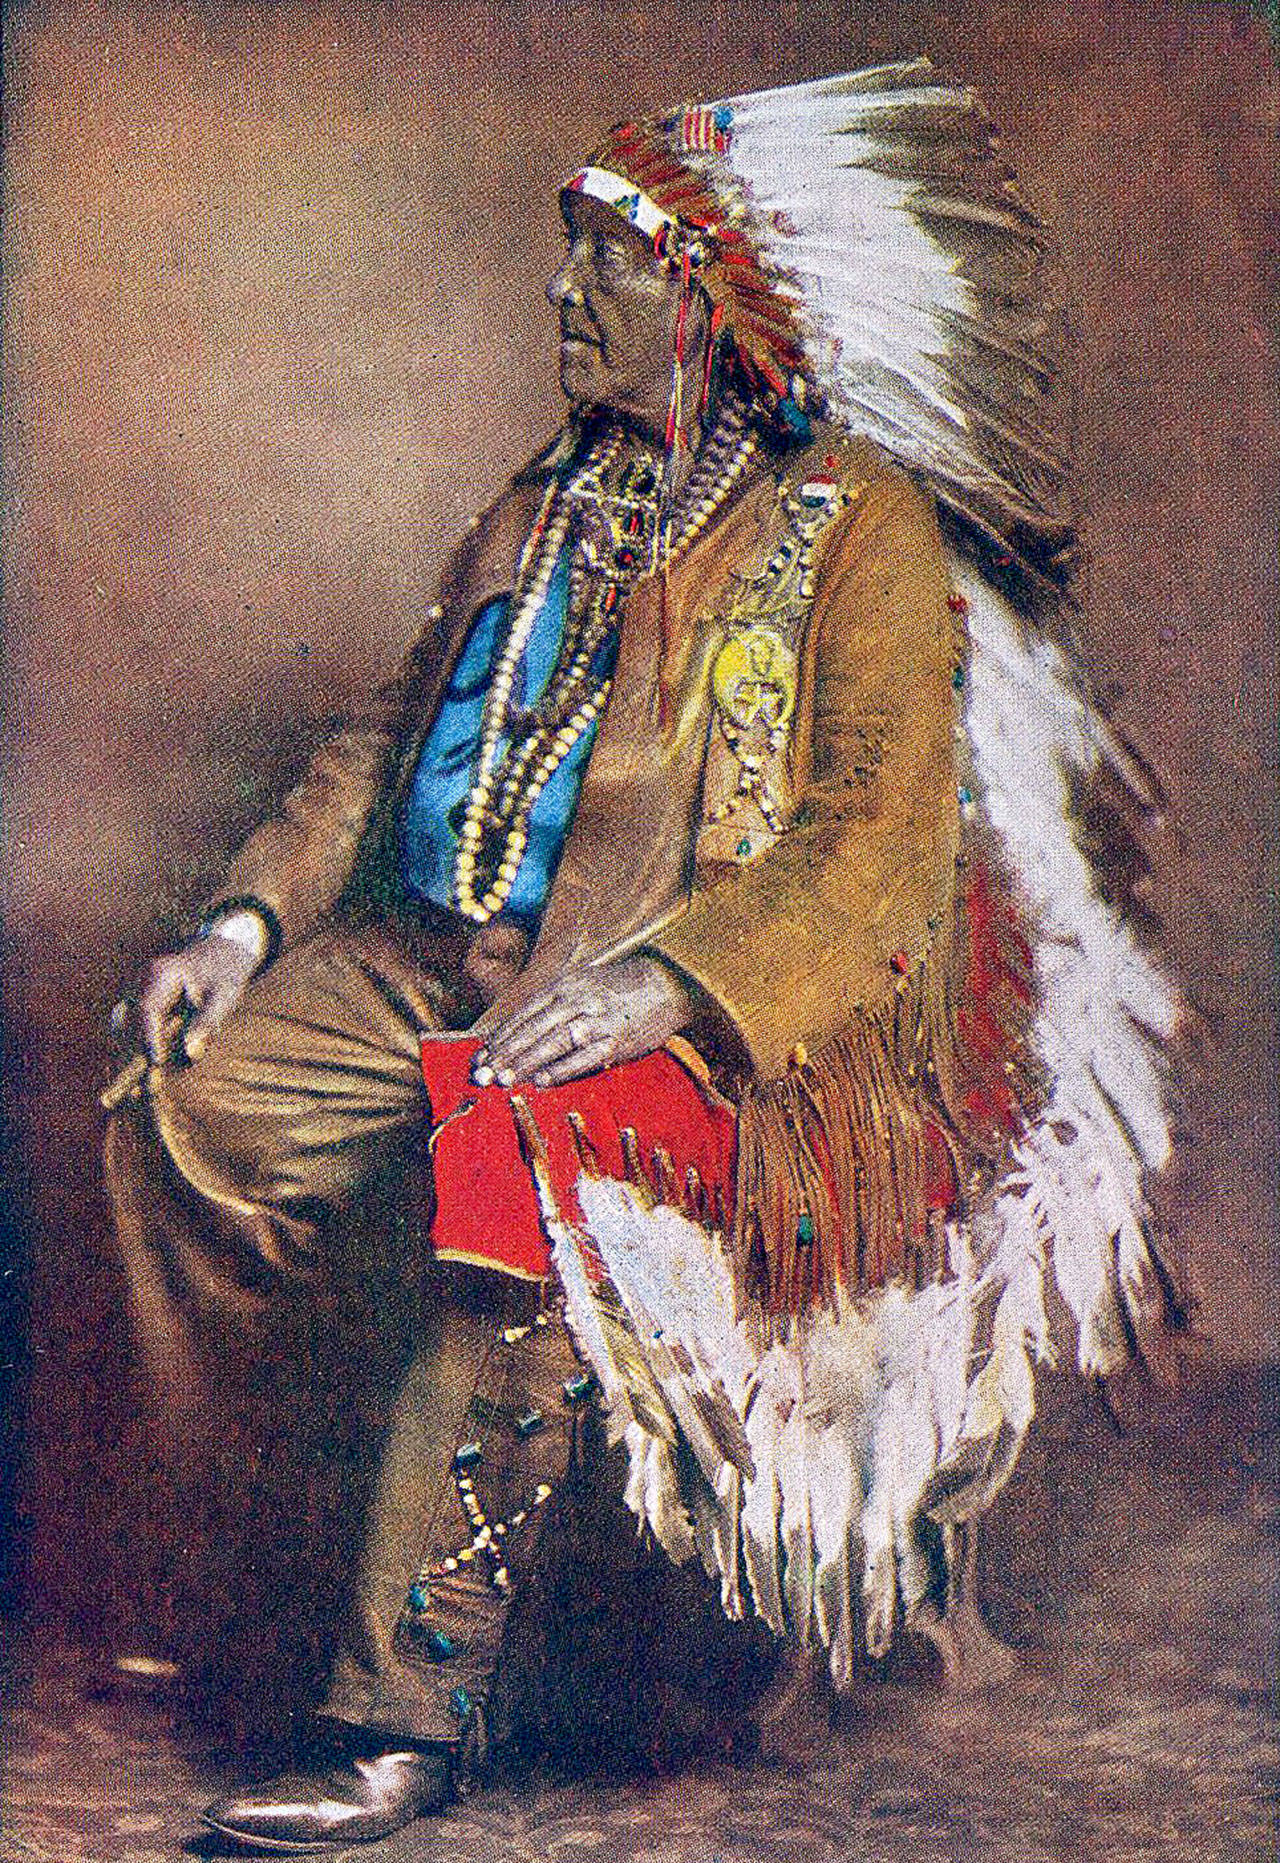 The picture on the frontispiece of Big Chief White Horse Eagle’s biography titled “We Indians — The Passing of a Great Race.”